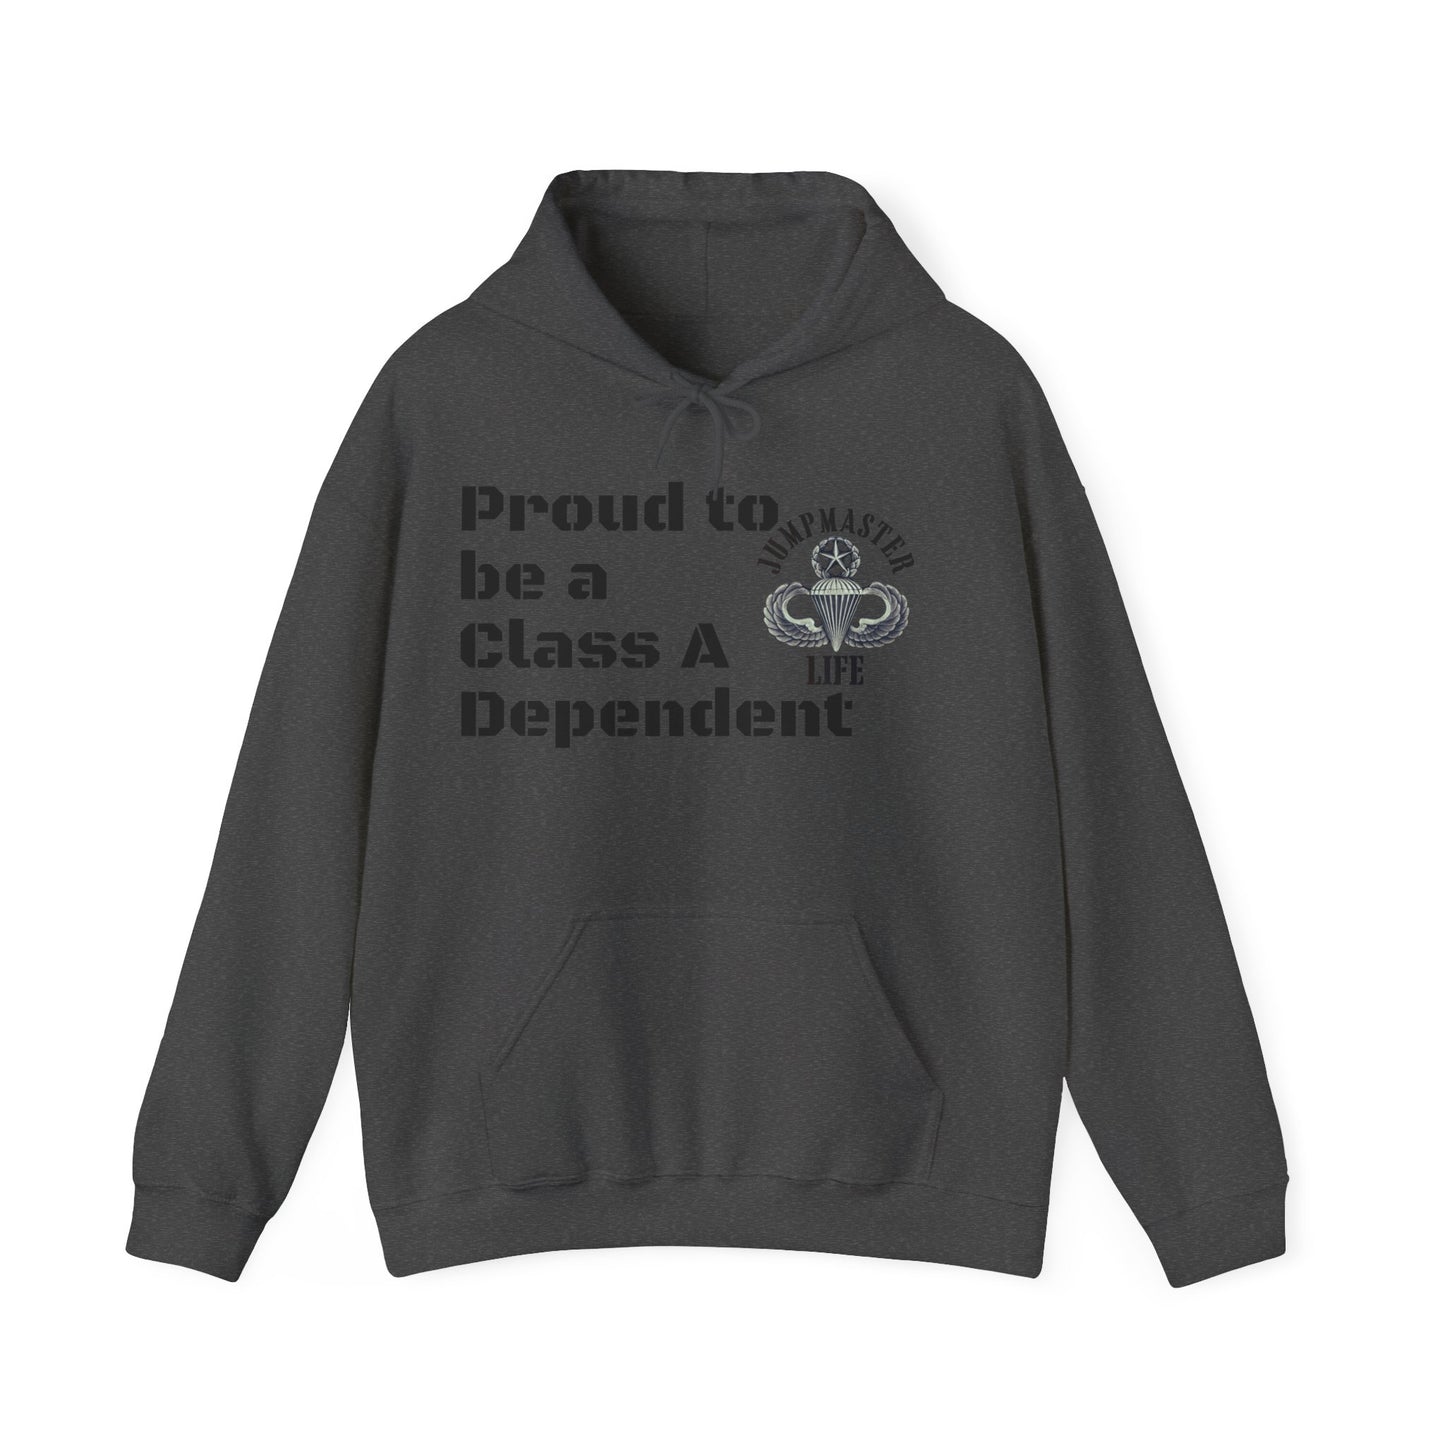 Proud to be a Class A Dependent Jumpmaster Life Unisex Heavy Blend™ Hooded Sweatshirt